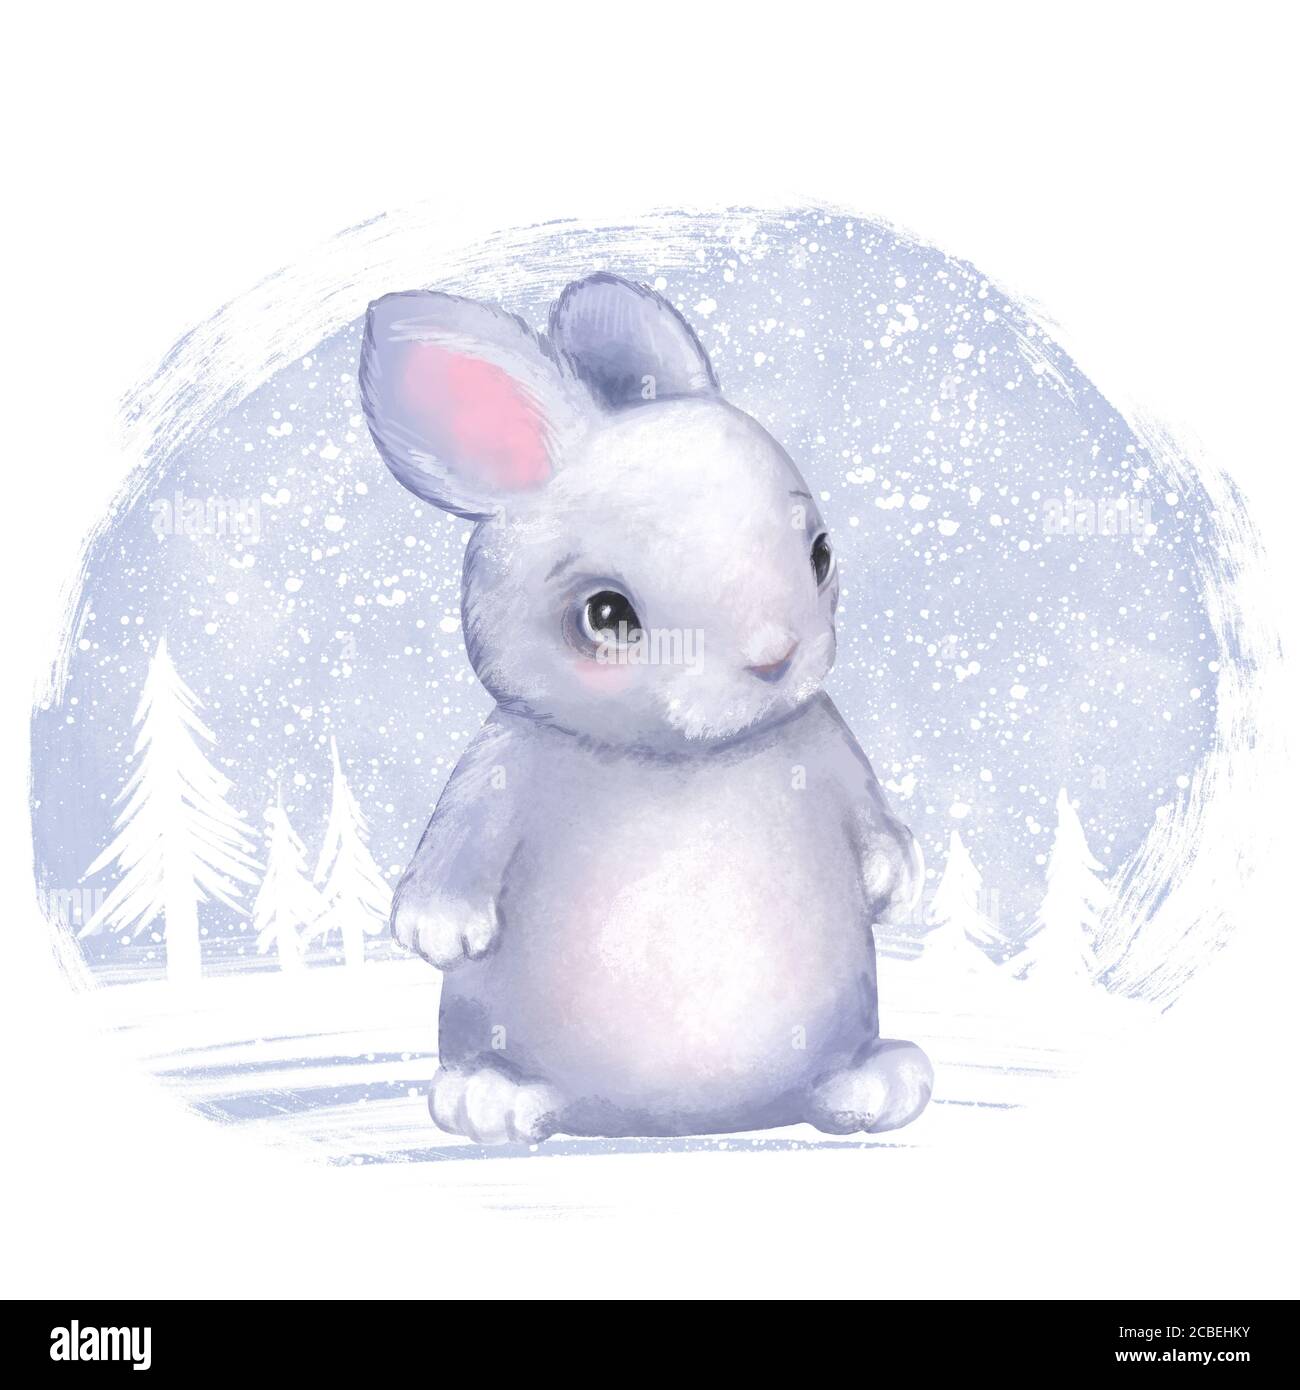 Cute winter illustration of bunny in forest. Stock Photo